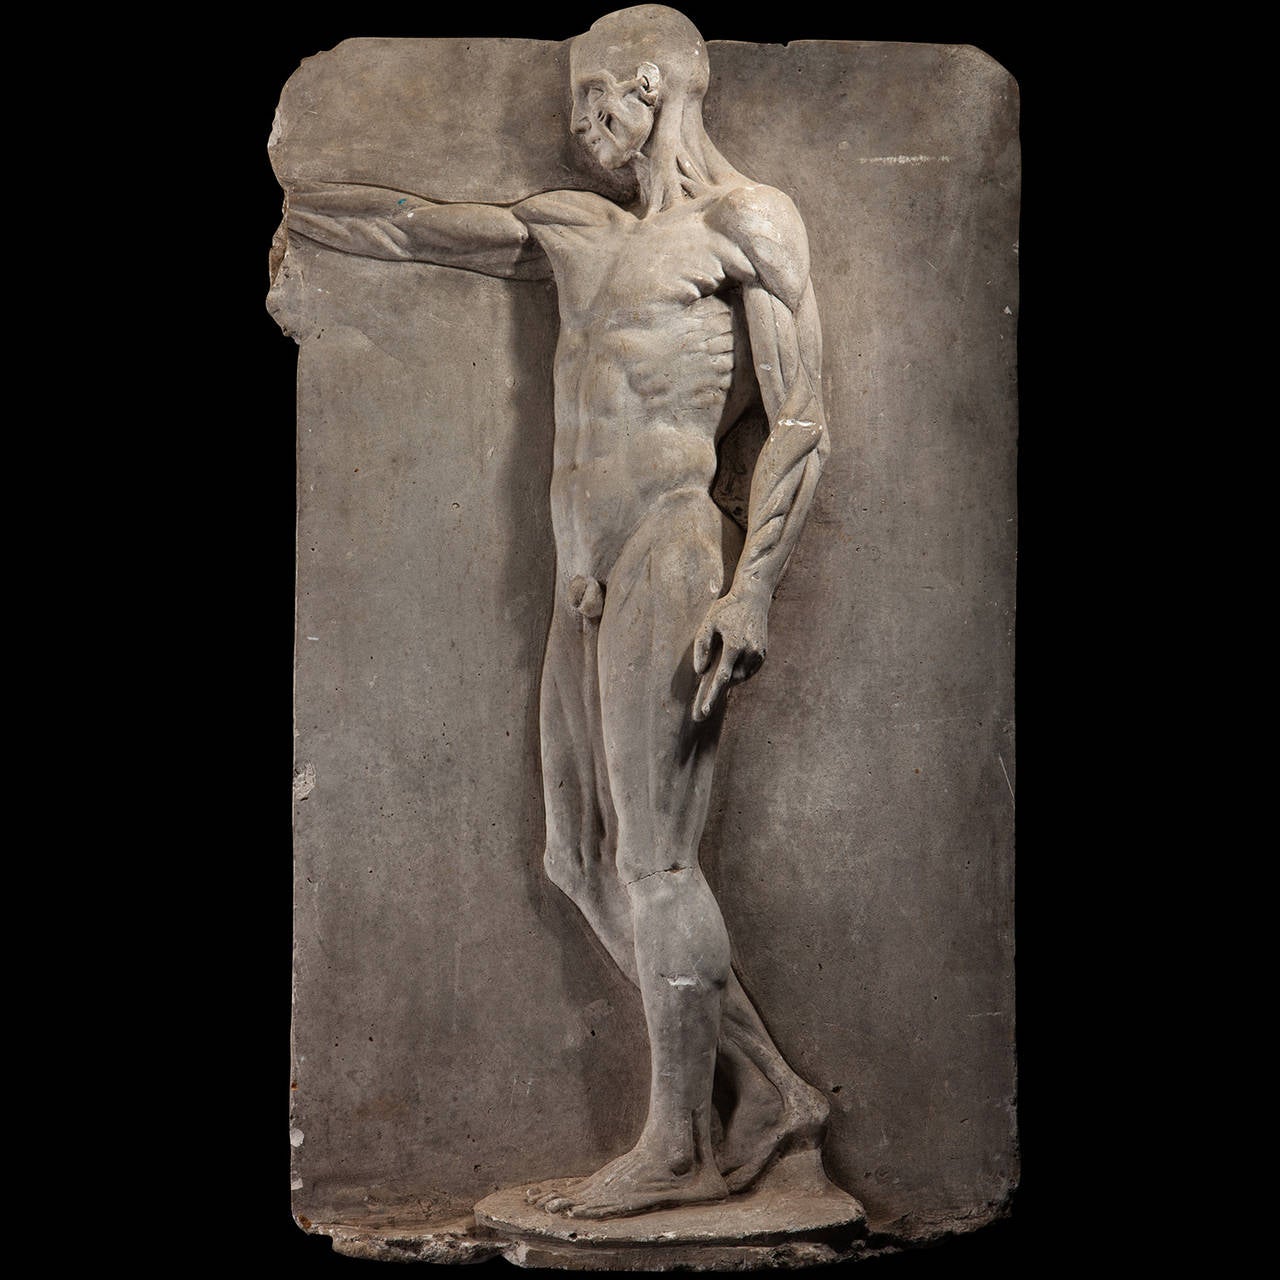 Plaster cast anatomy of a man, relief moulded as a plaque showing a musco-skeletal male figure.